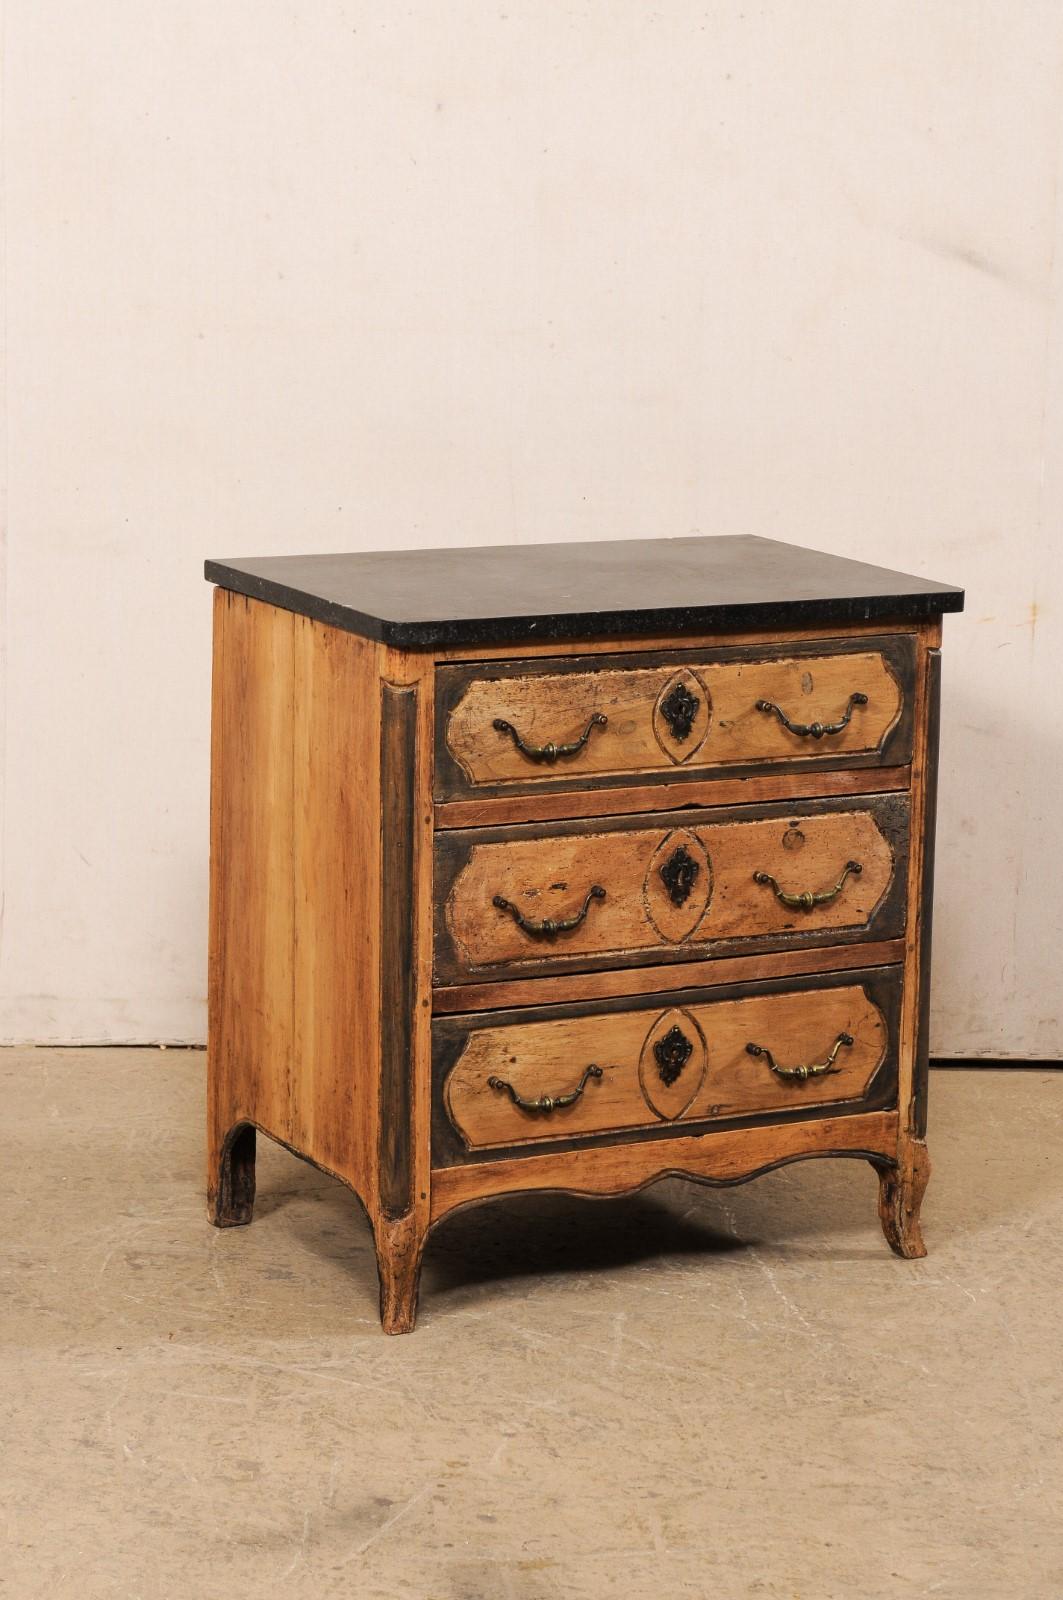 A French petite-sized chest with its original marble top from the 18th century. This antique commode from France retains its original marble top which rests atop the carved-wood case with rounded front side posts that flank three graduated drawers,